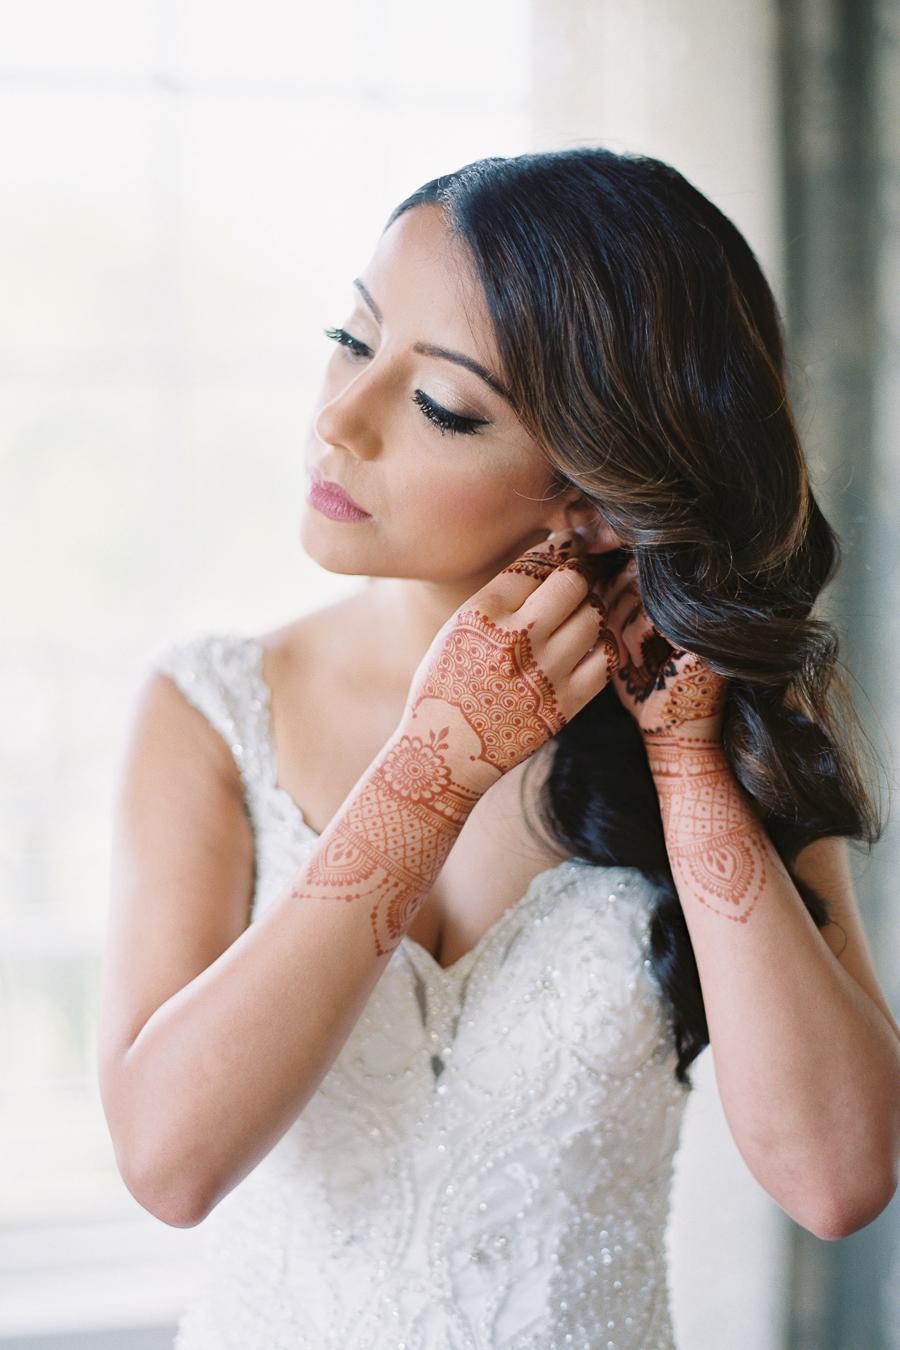 The white wedding dress and henna. Do they go together?